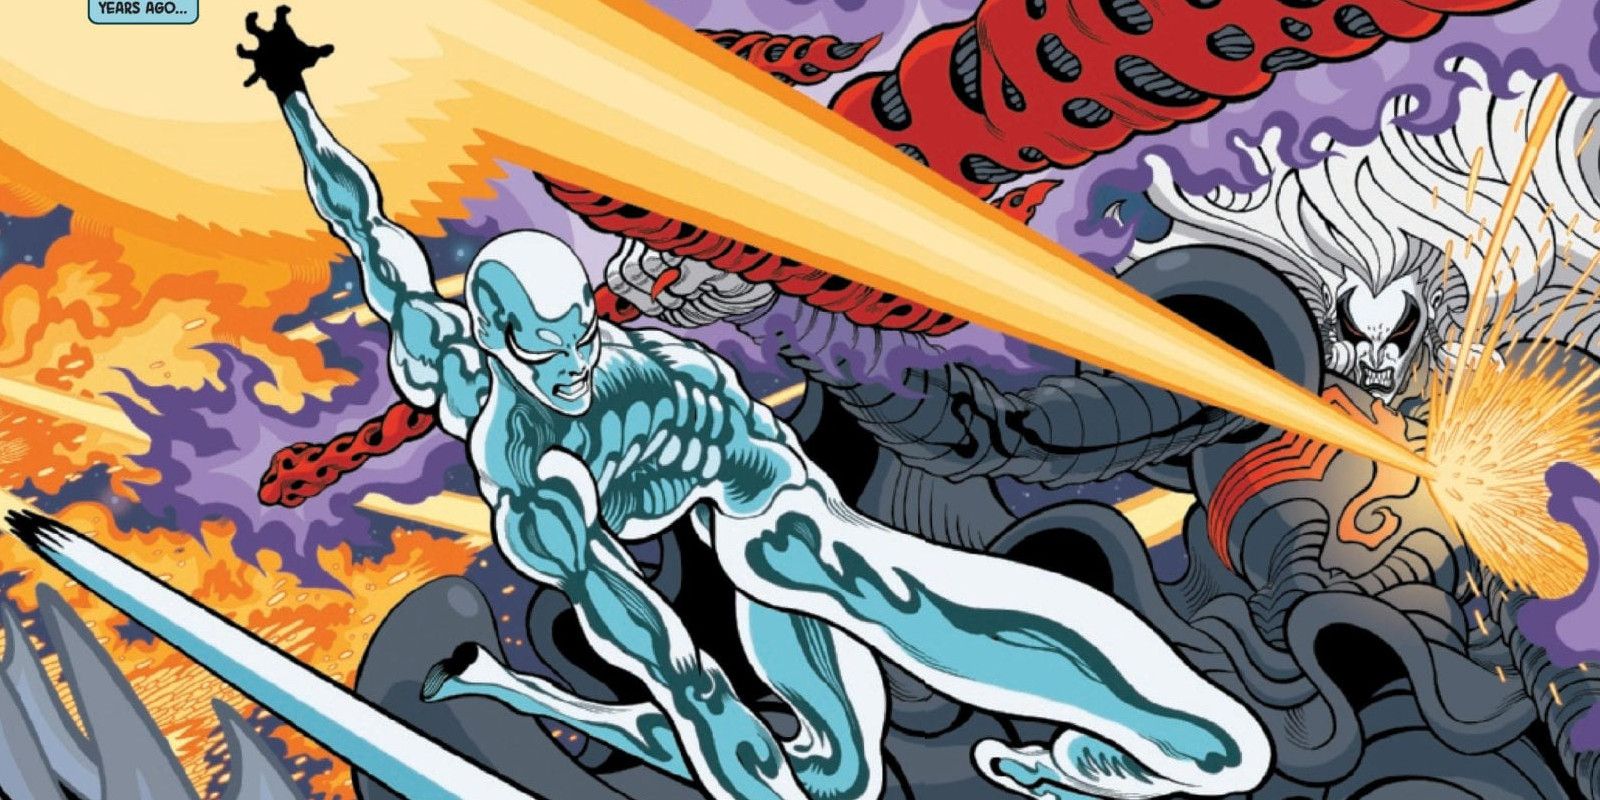 Silver Surfer time travels to the dawn of time.